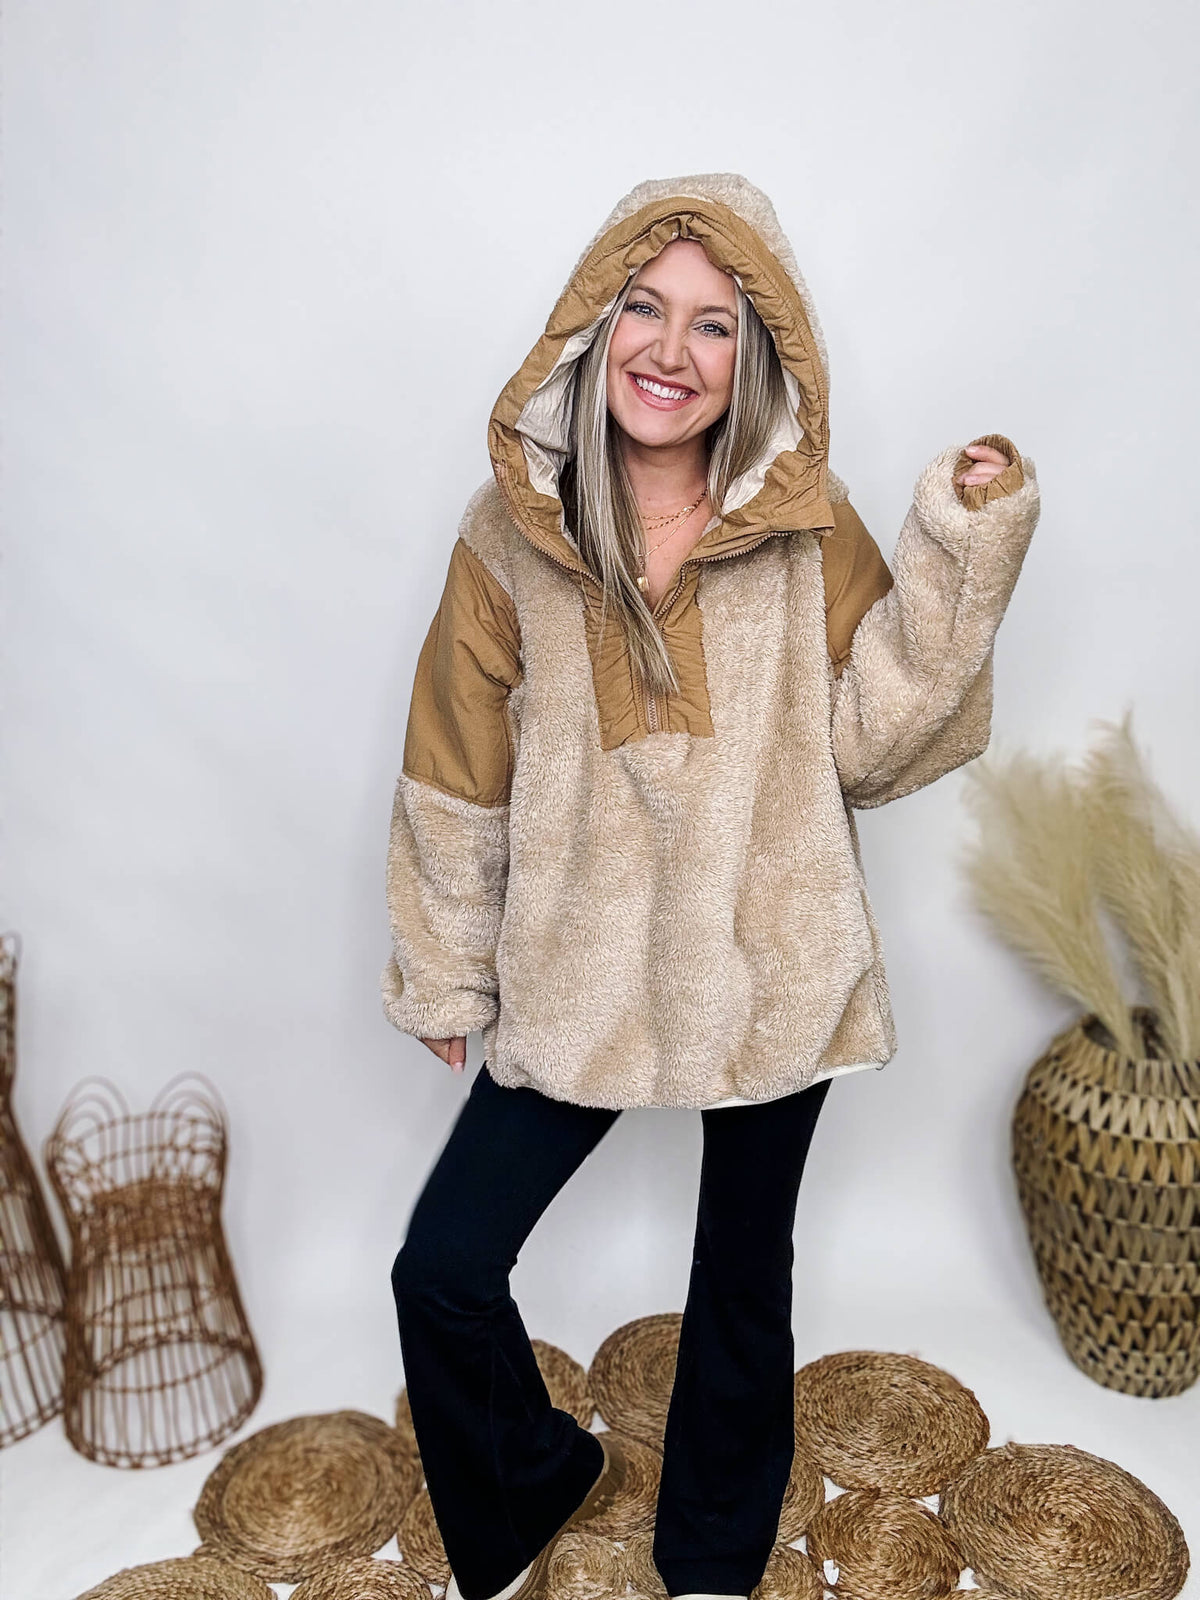 In Loom Beige Sherpa and Camel Snuggly Soft Plush Sherpa 1/4 Zipper Hoodie Pullover Kangaroo Pocket Nylon Contrast Accents Oversized Fit 100% Polyester